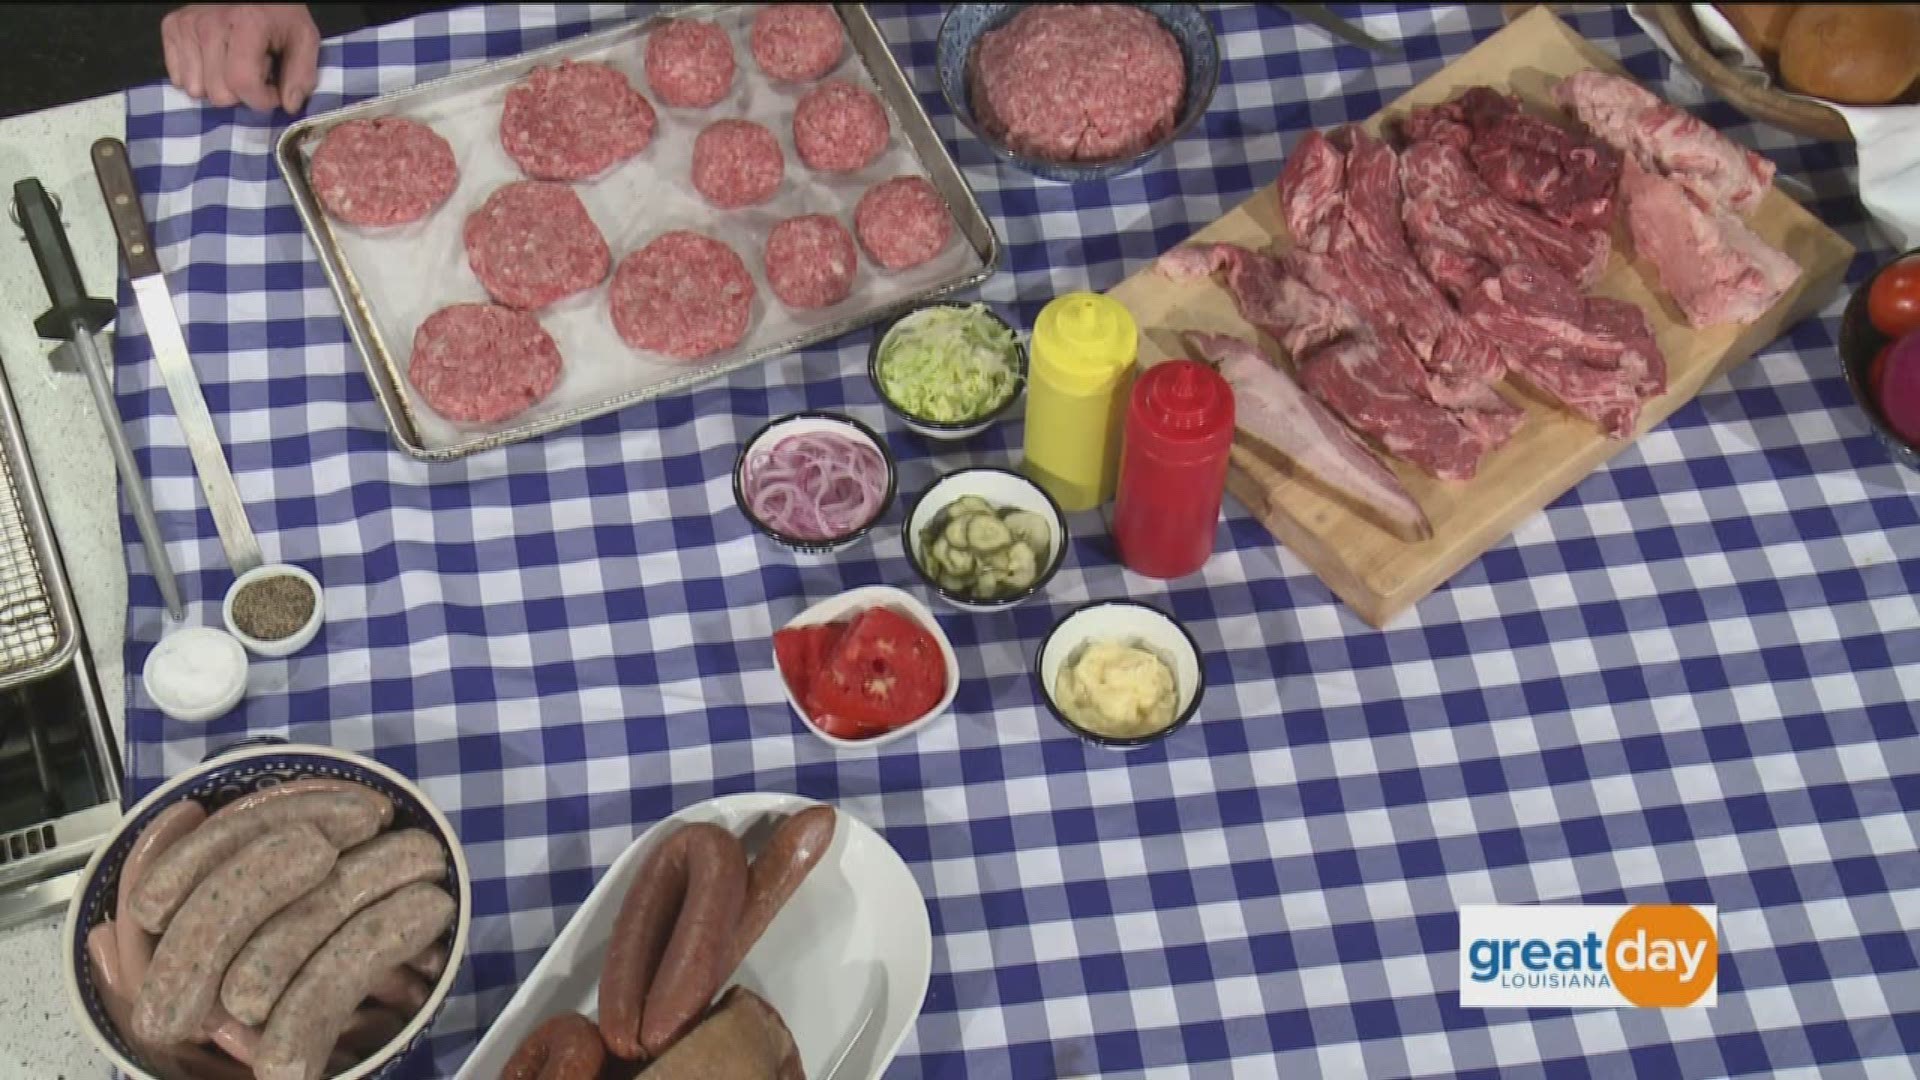 Cochon Butcher is the casual offspring of Cochon, and while pig is normally the first item you think of, today Butcher Max Hamlin and Poppy Tooker are showing us how to grill the perfect burger.